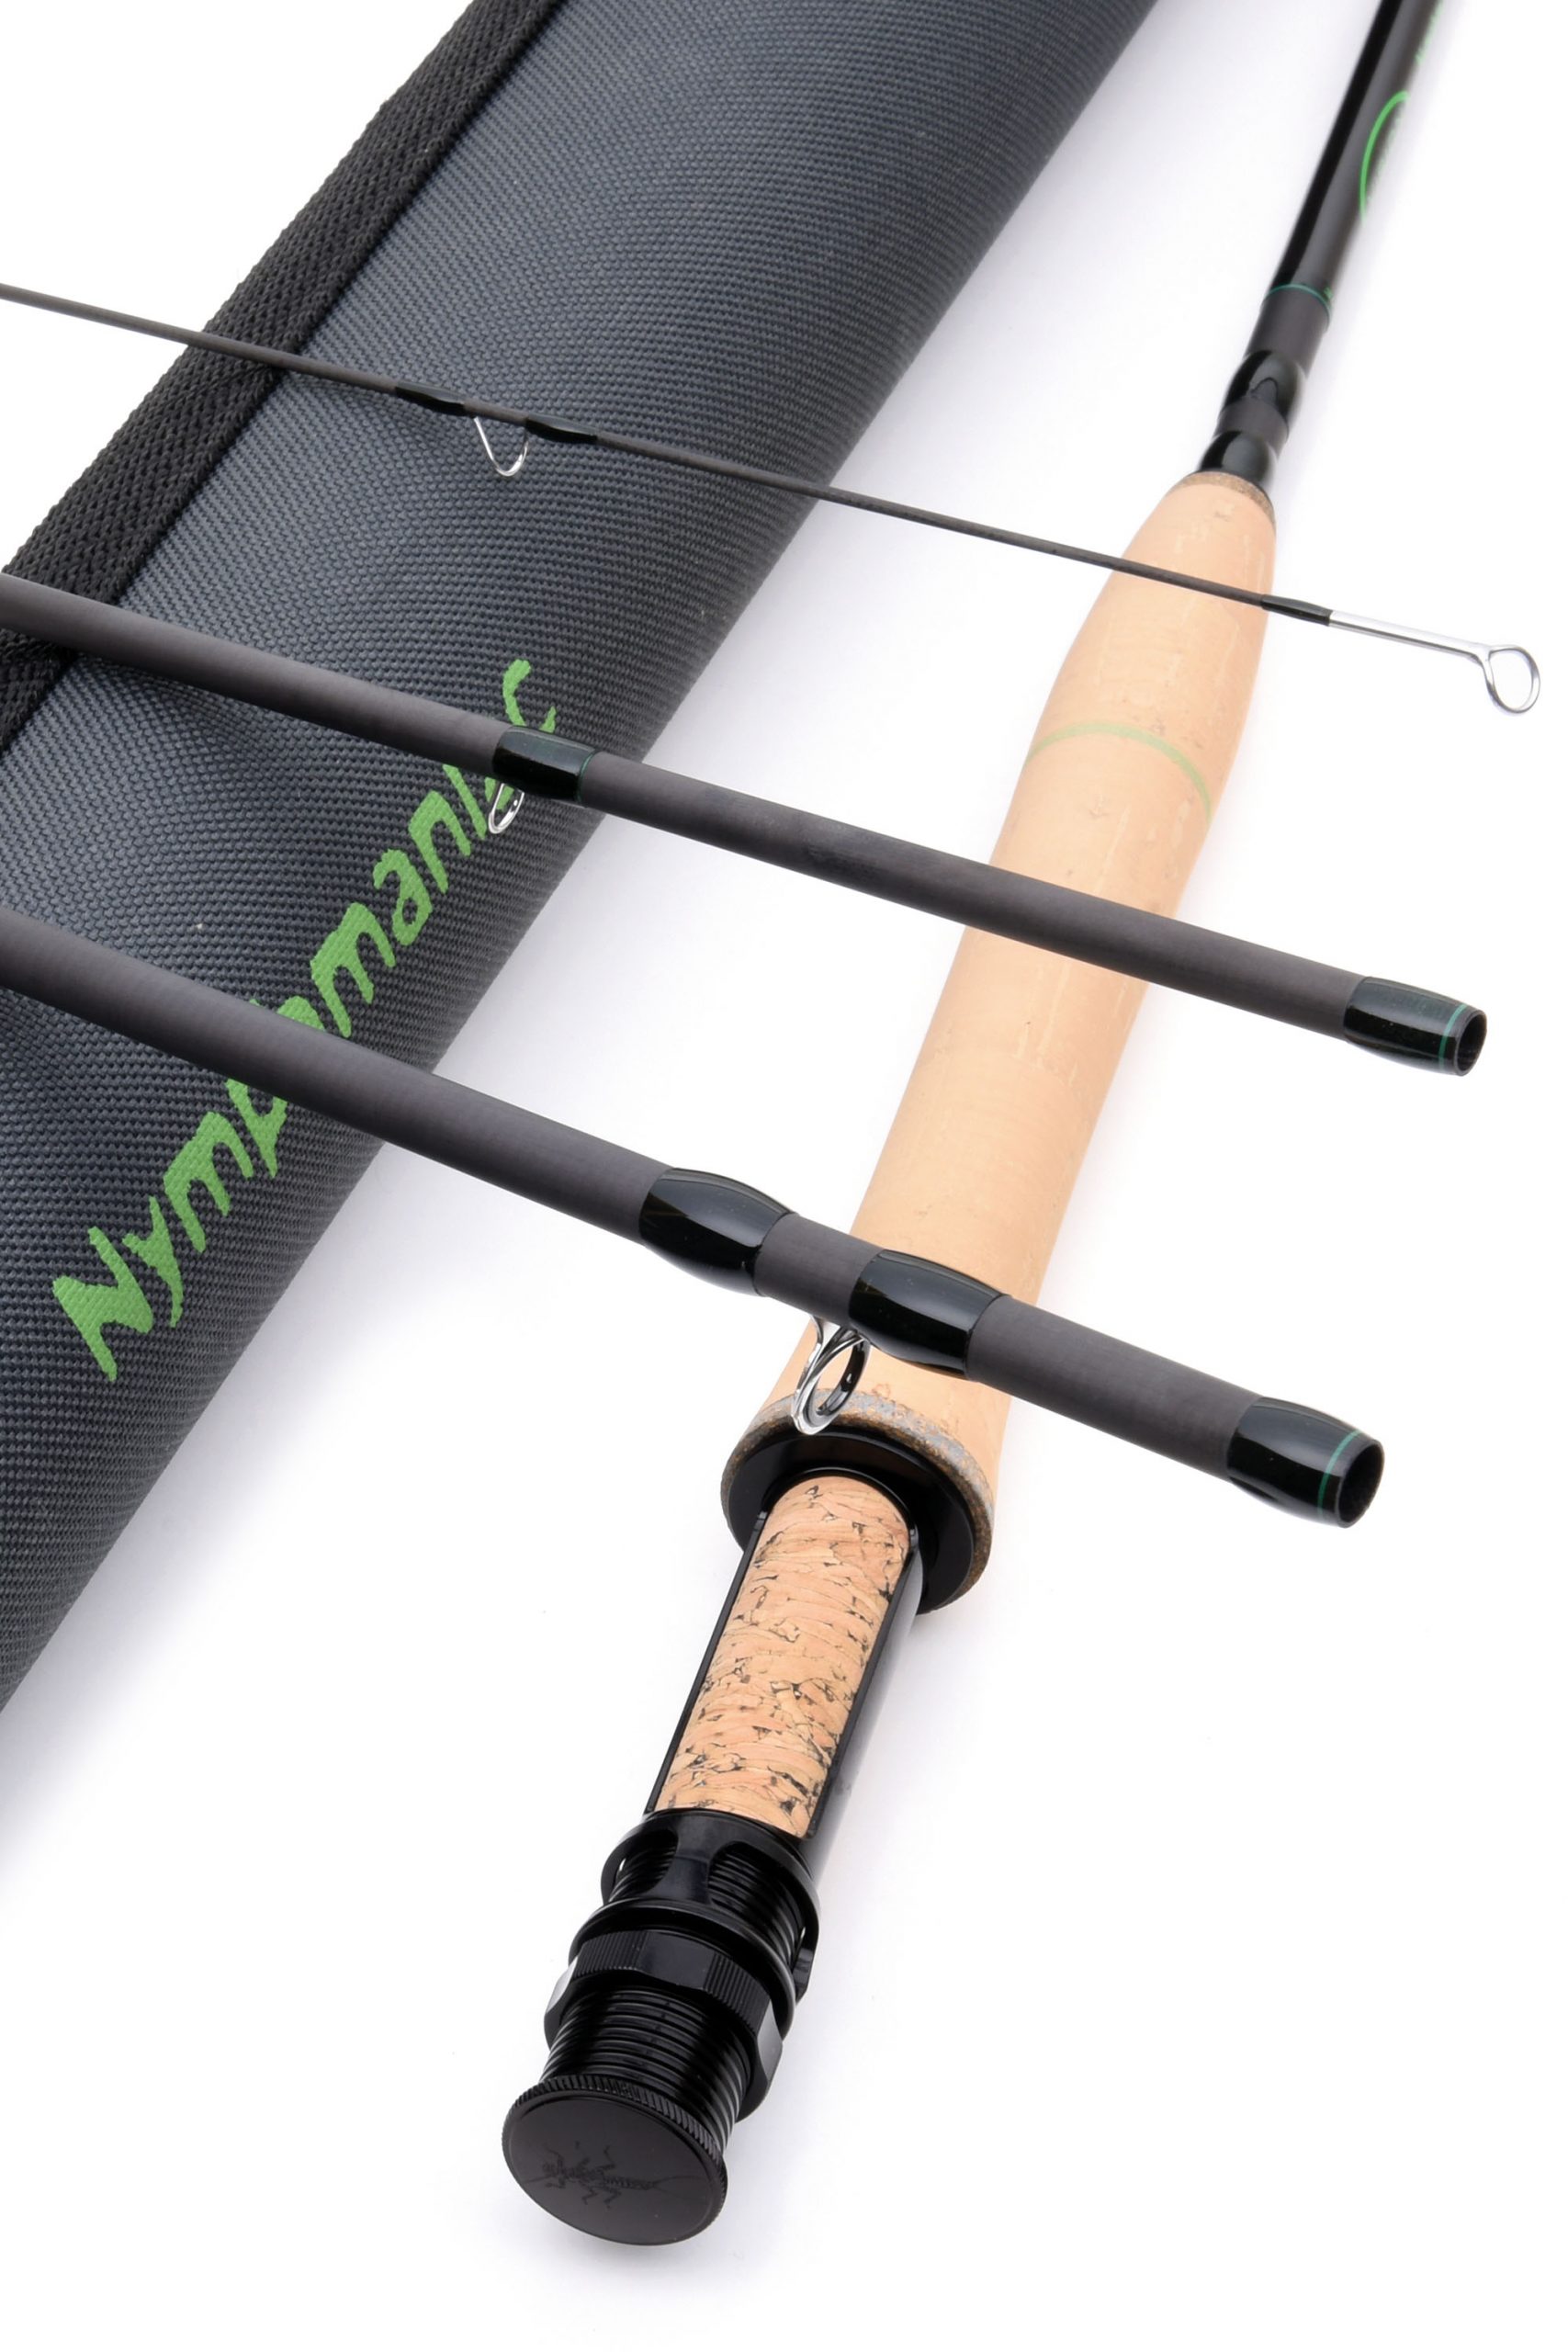 Vision Nymphmaniac Fly Rod 10 Foot 6 inch #3 For Fly Fishing